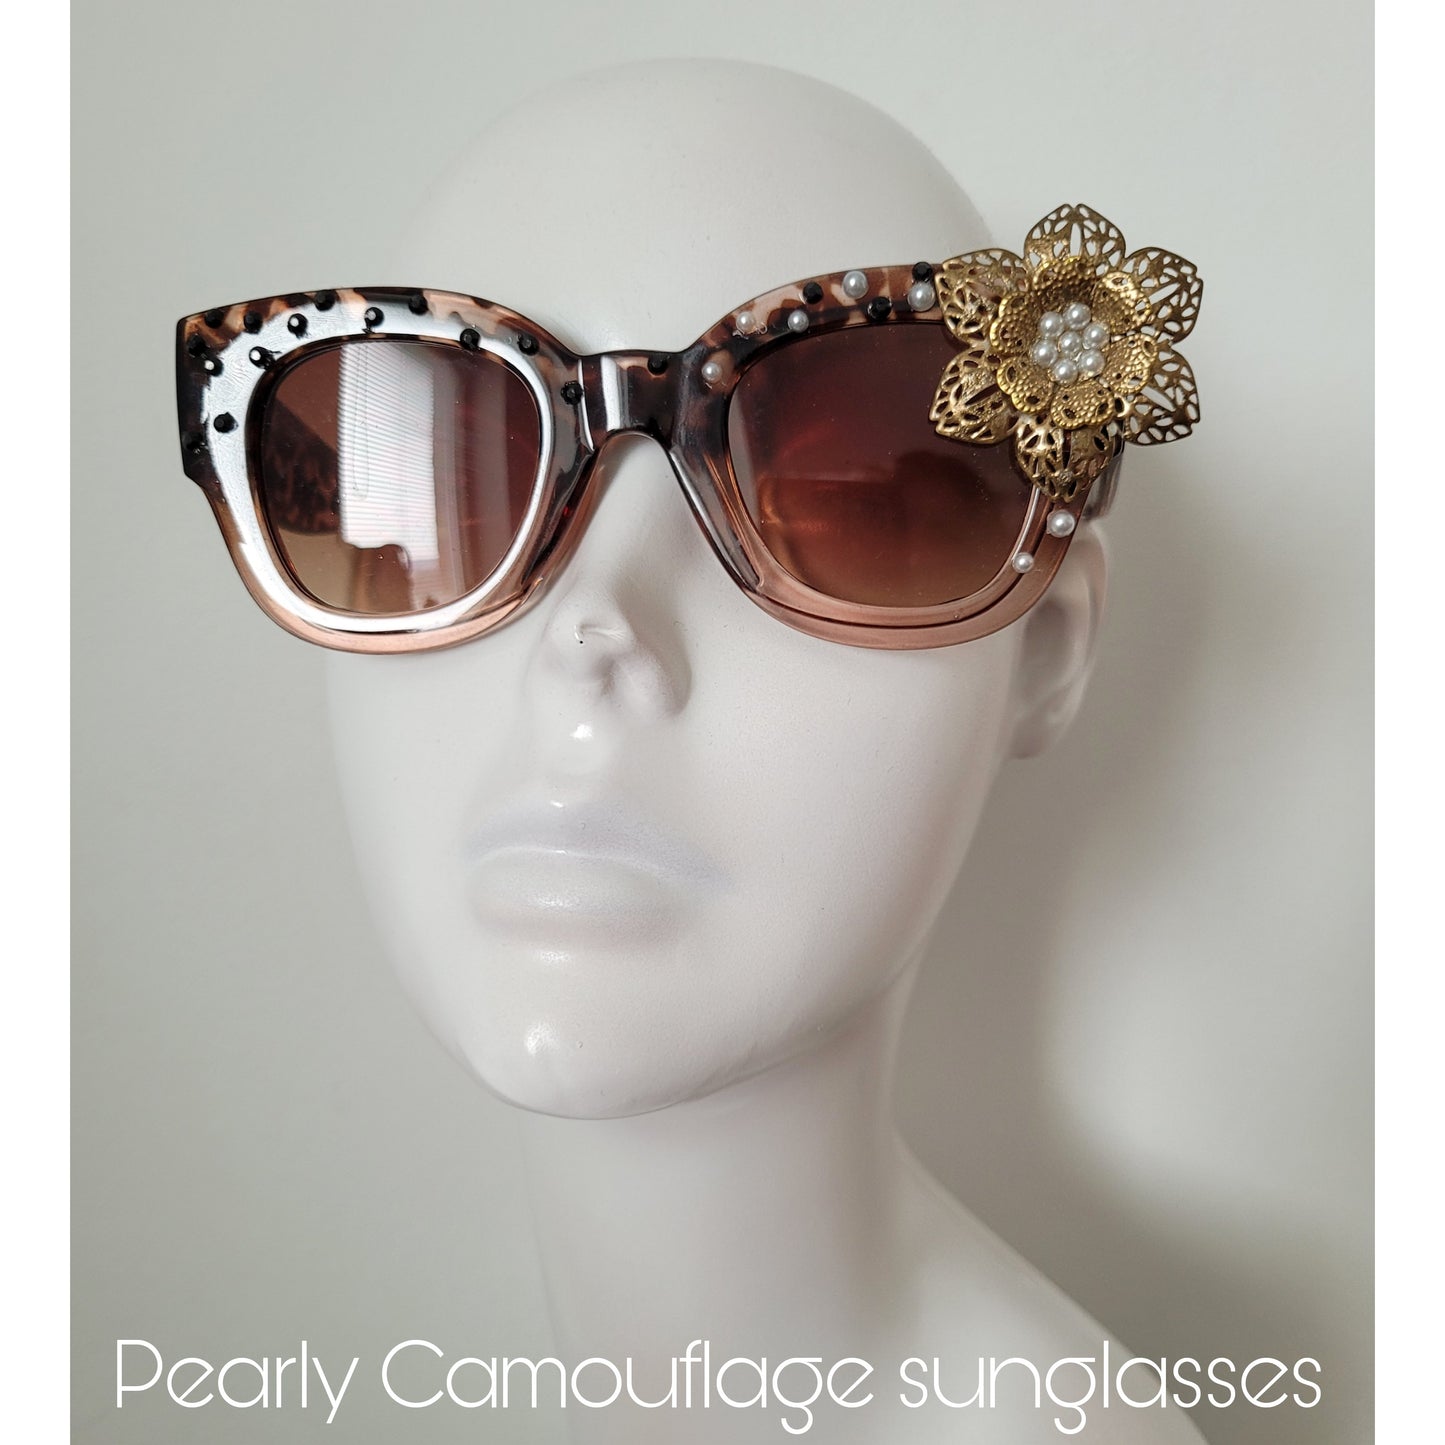 The Pearly Camouflage Sunglasses